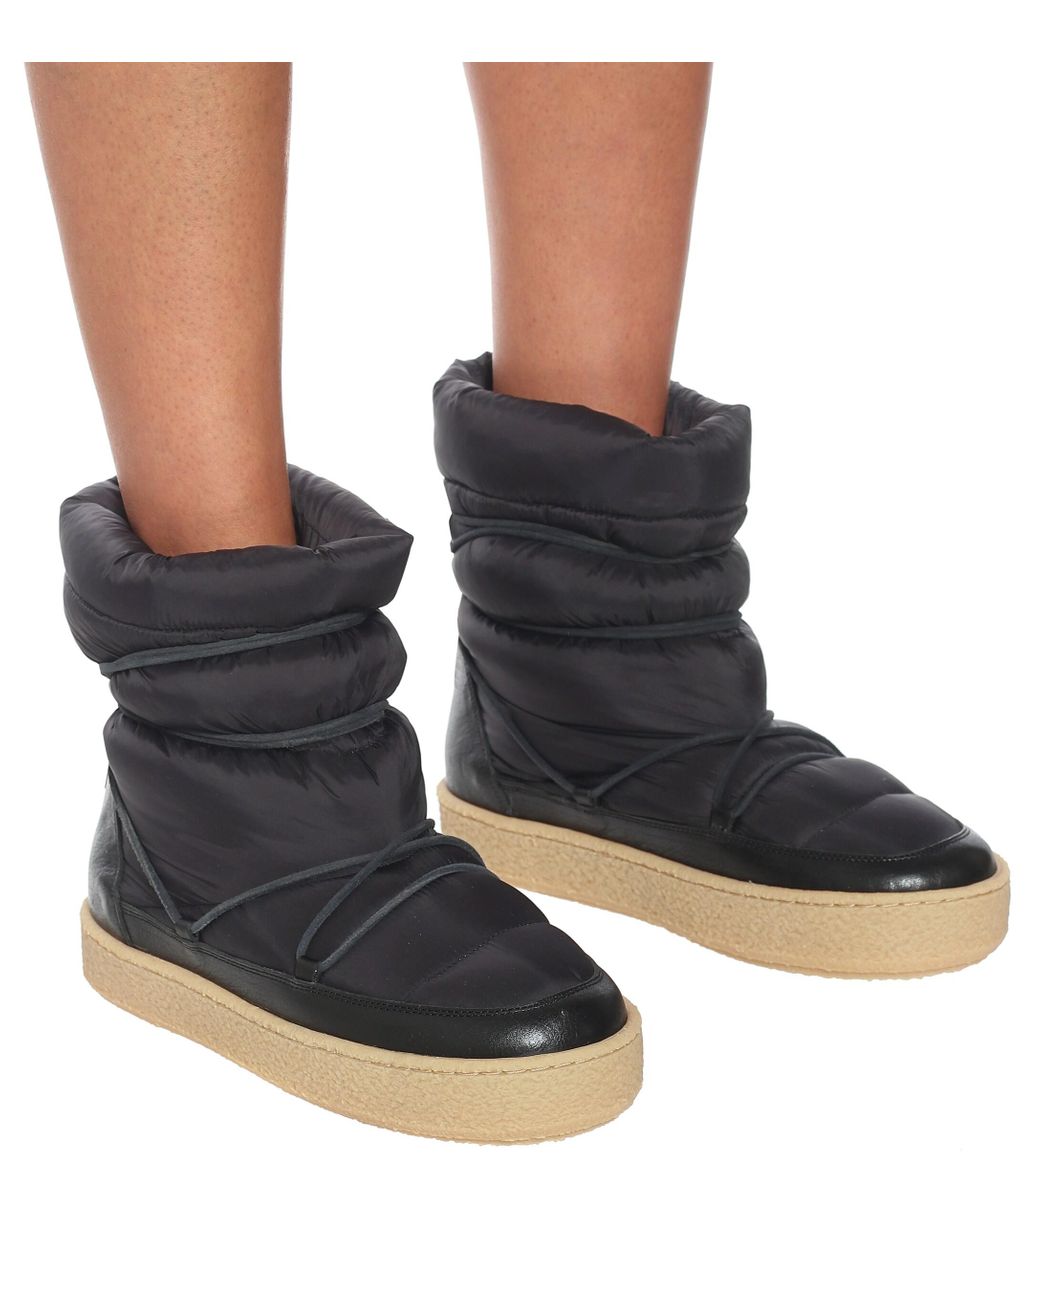 Isabel Marant Zimlee Padded Snow Boots in |